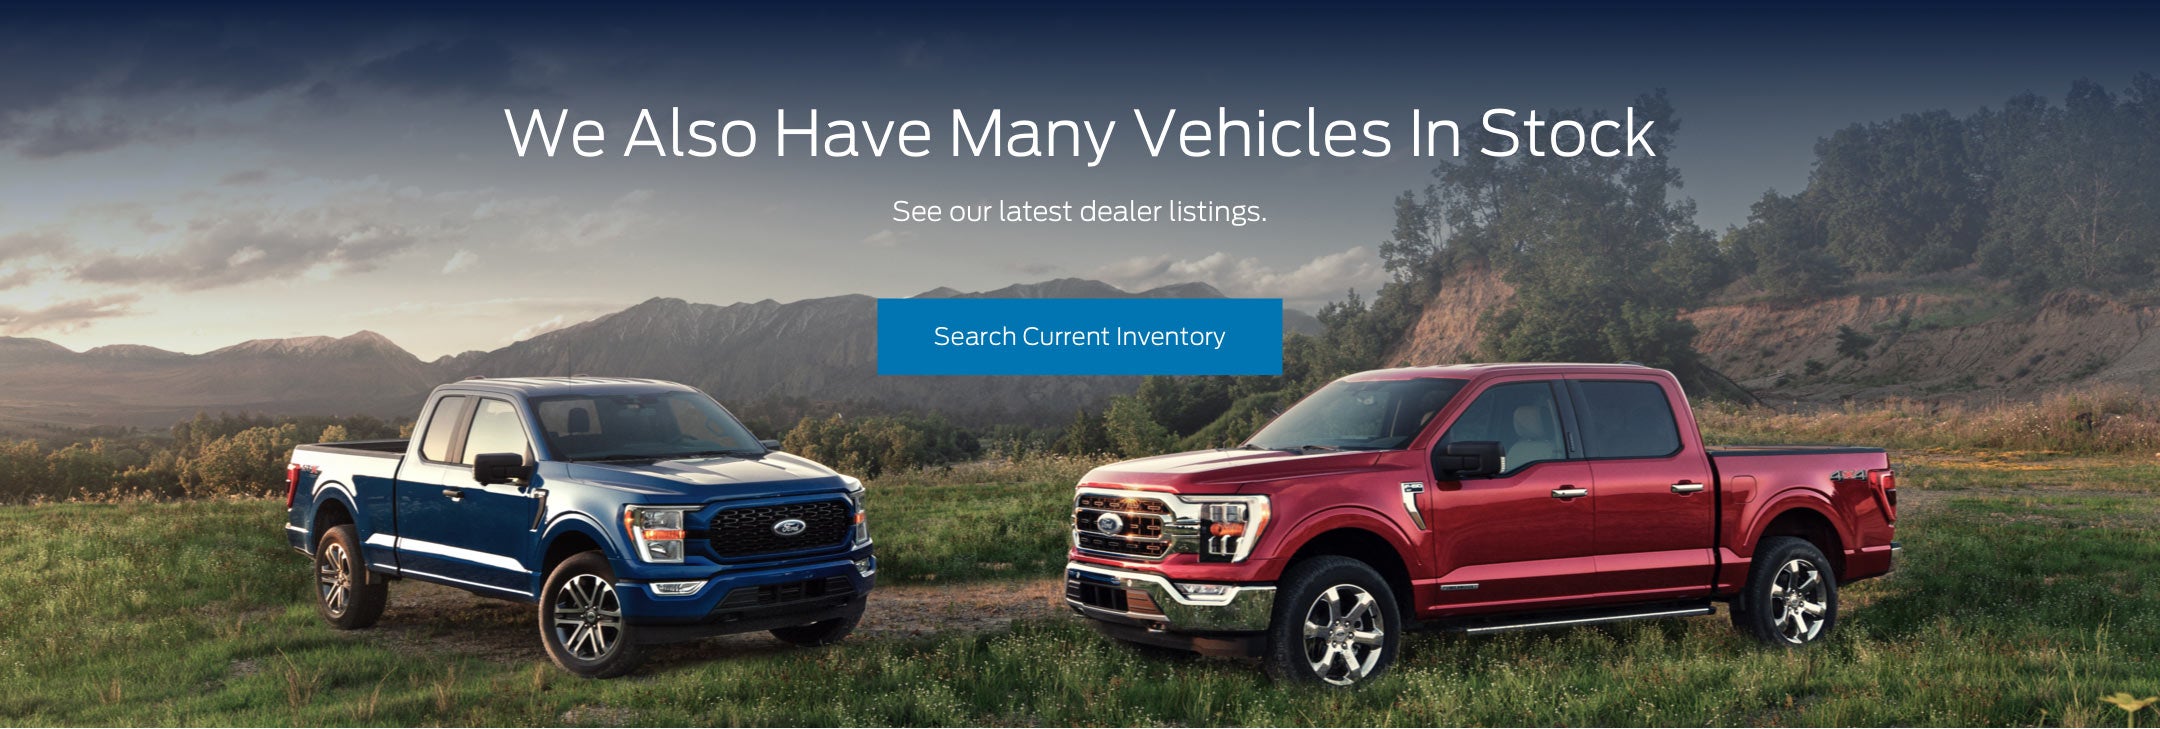 Ford vehicles in stock | Hardy Family Ford in Dallas GA